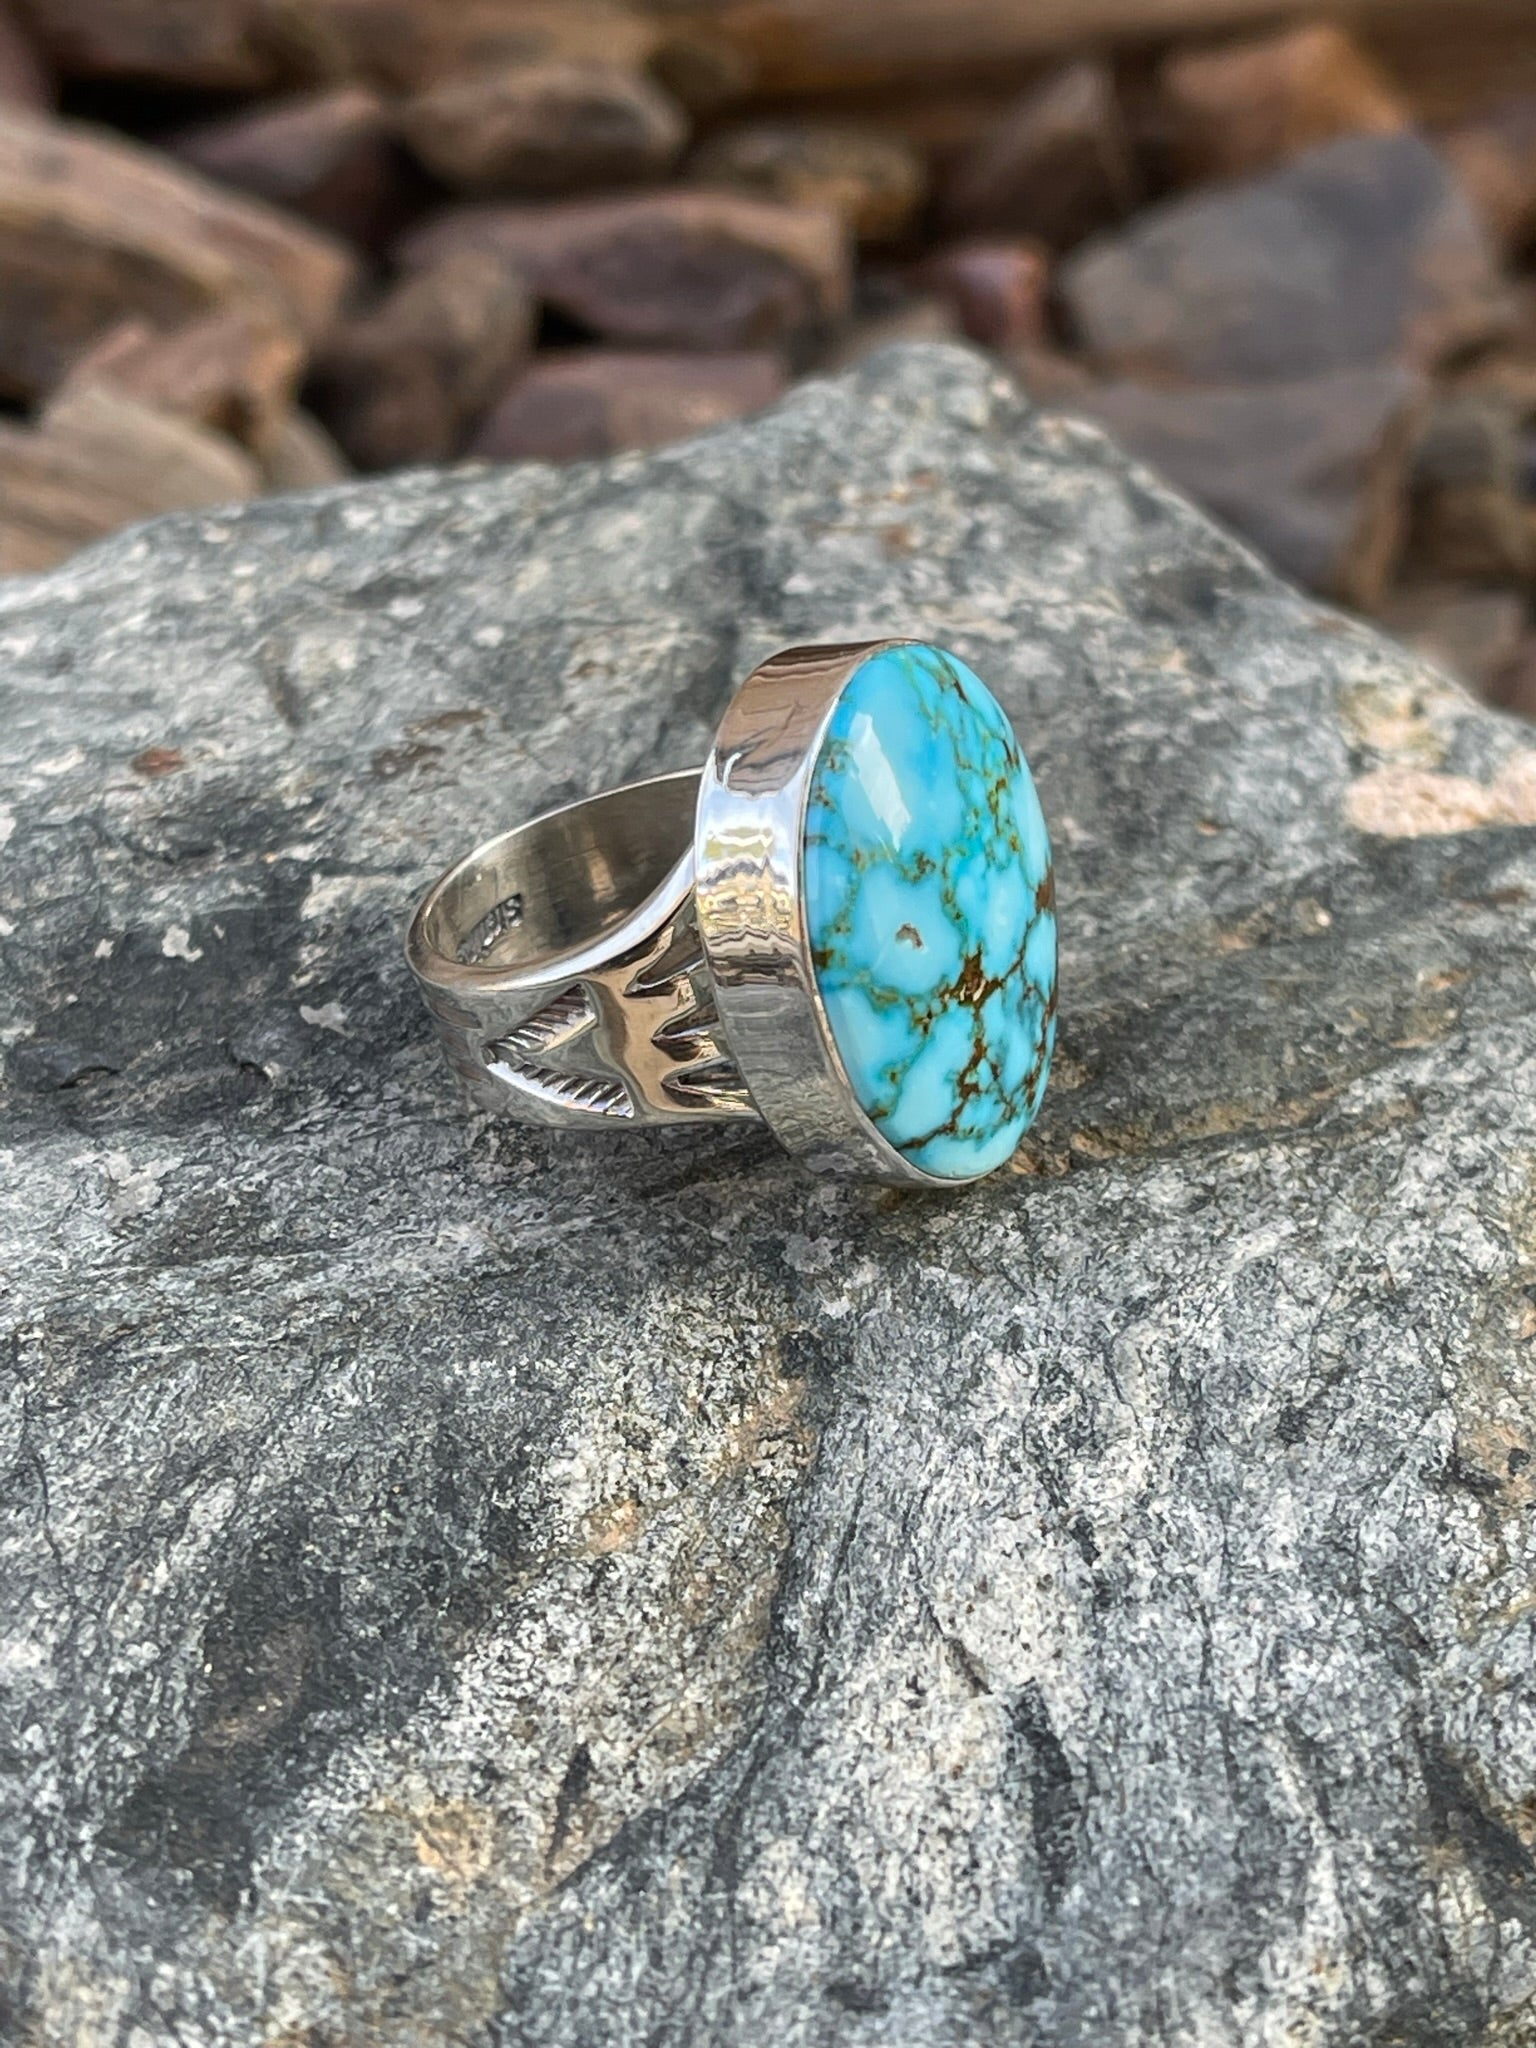 Handmade Sterling Silver Turquoise Ring with Plan Bezel Trim - Size 7